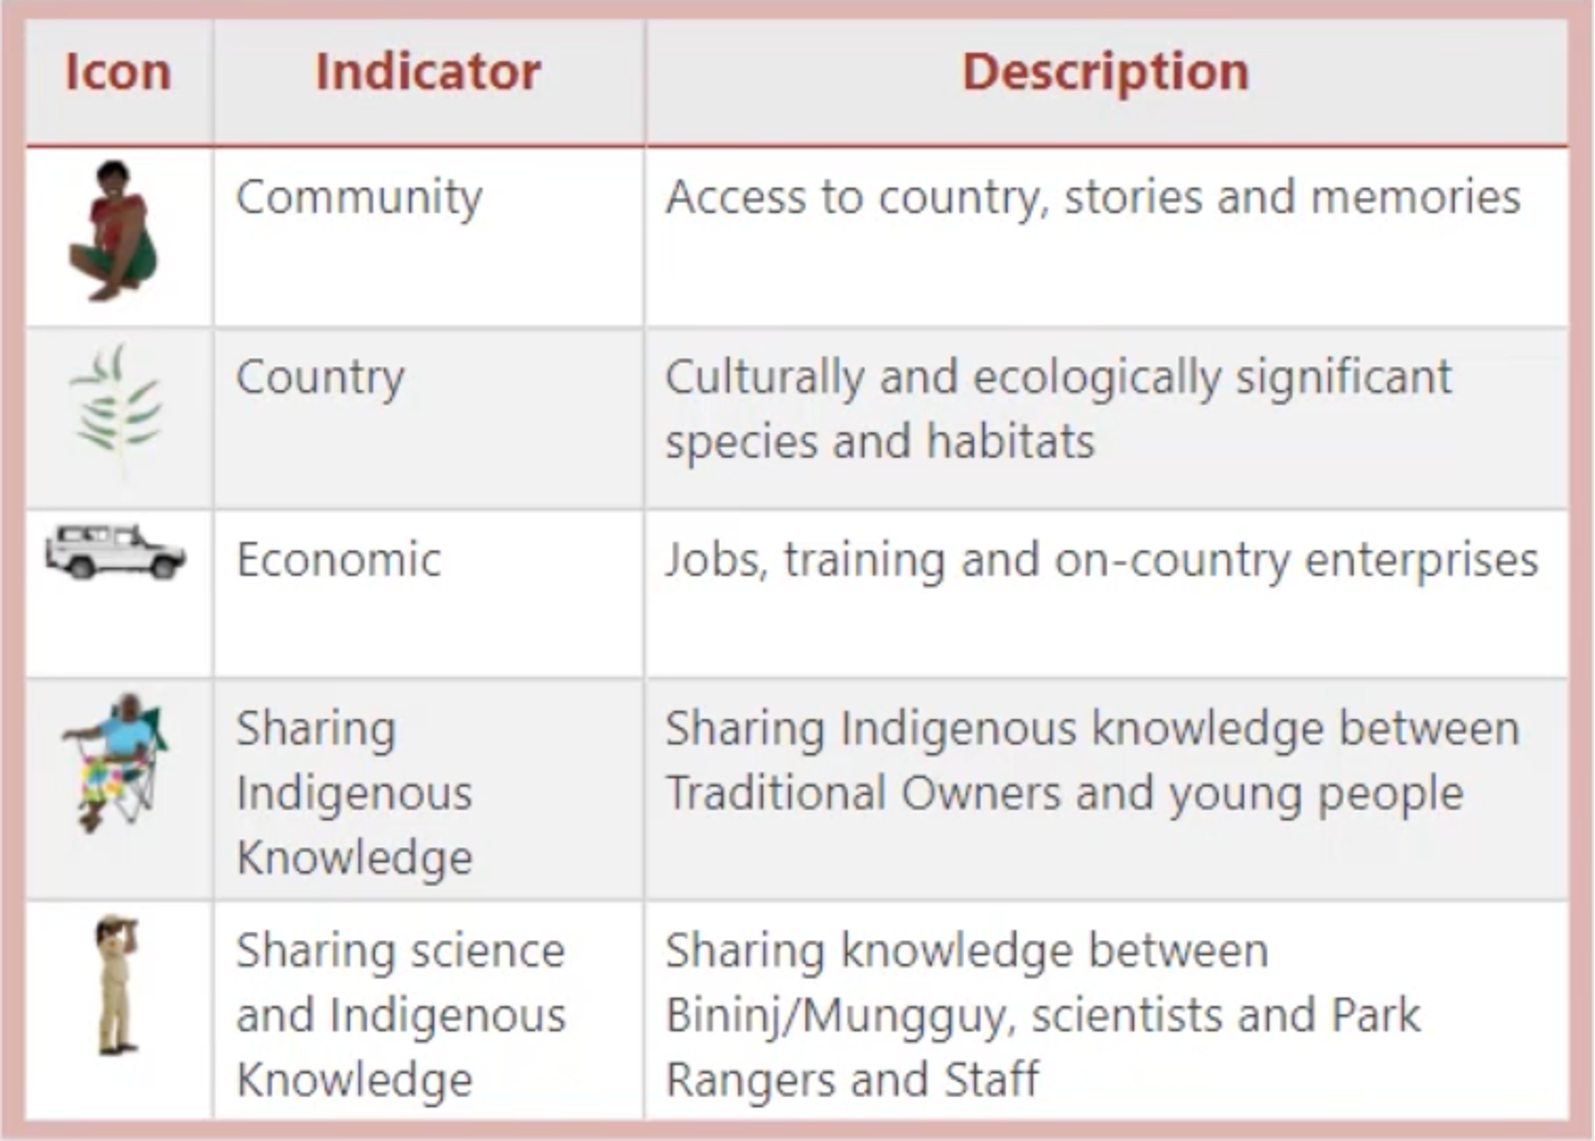 This is a legend from an app developed by the Bininj Mungguy Healthy Country Indicators project in Kakadu. The legend describes indicators for community, country, economics, sharing Indigenous knowledge and sharing science and Indigenous knowledge.